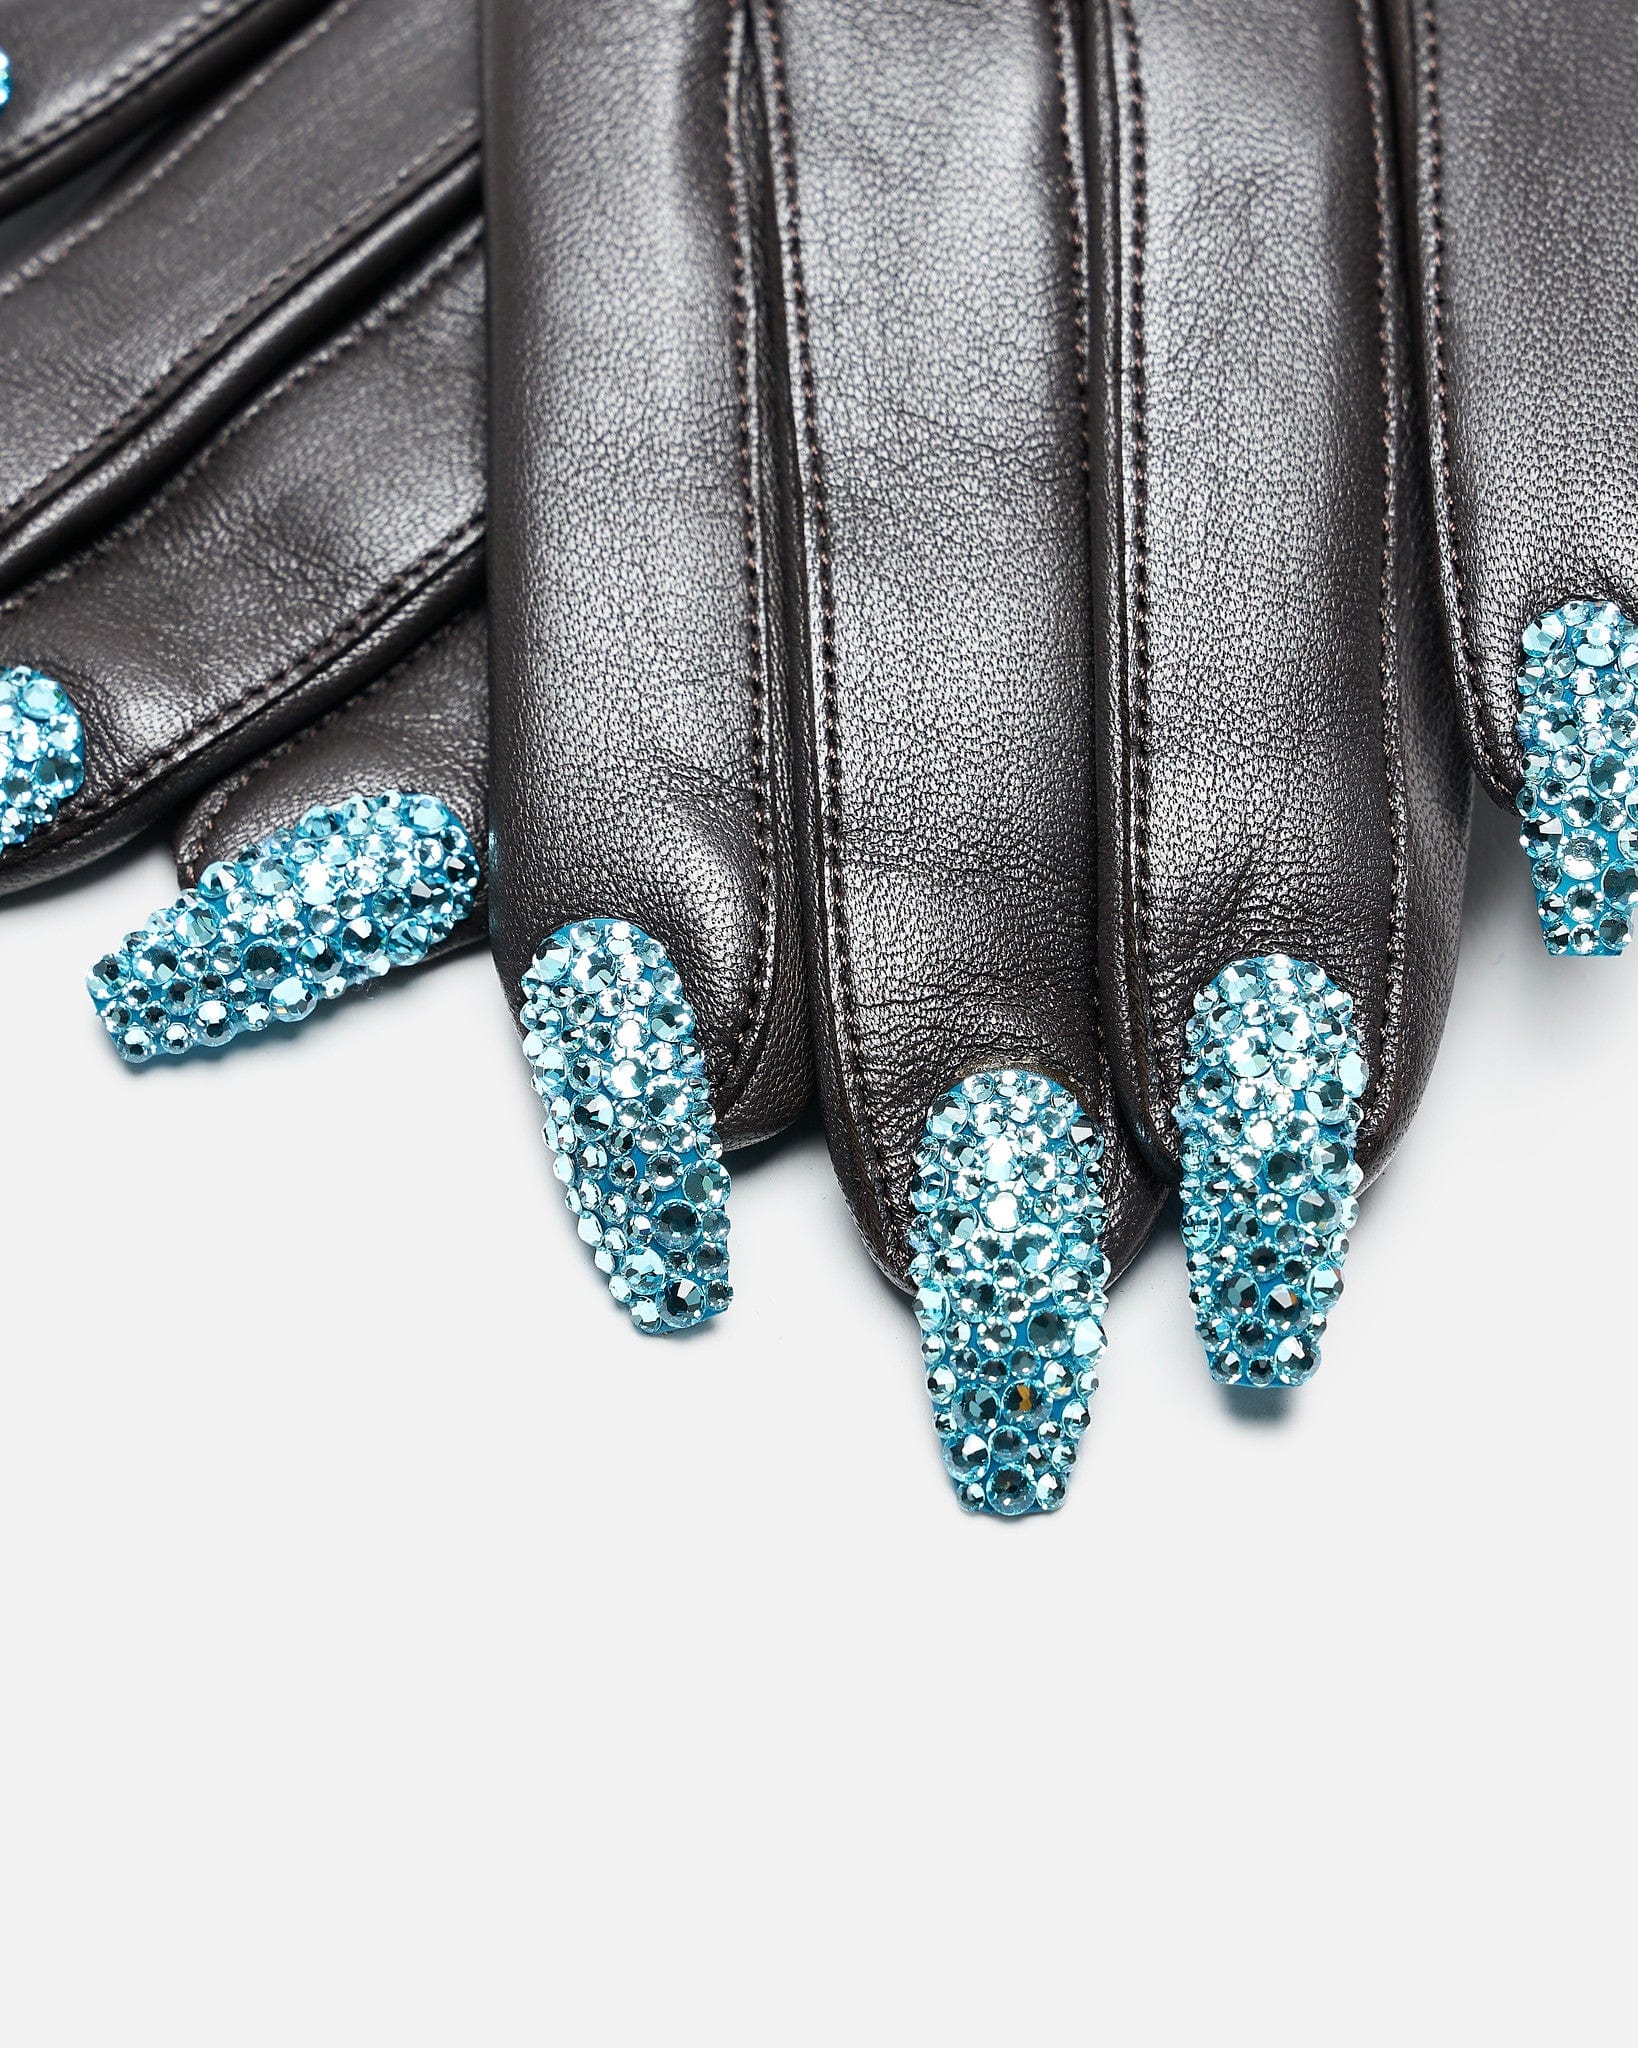 UNDERCOVER Leather Goods O/S Nail Detail Leather Gloves in Black and Blue